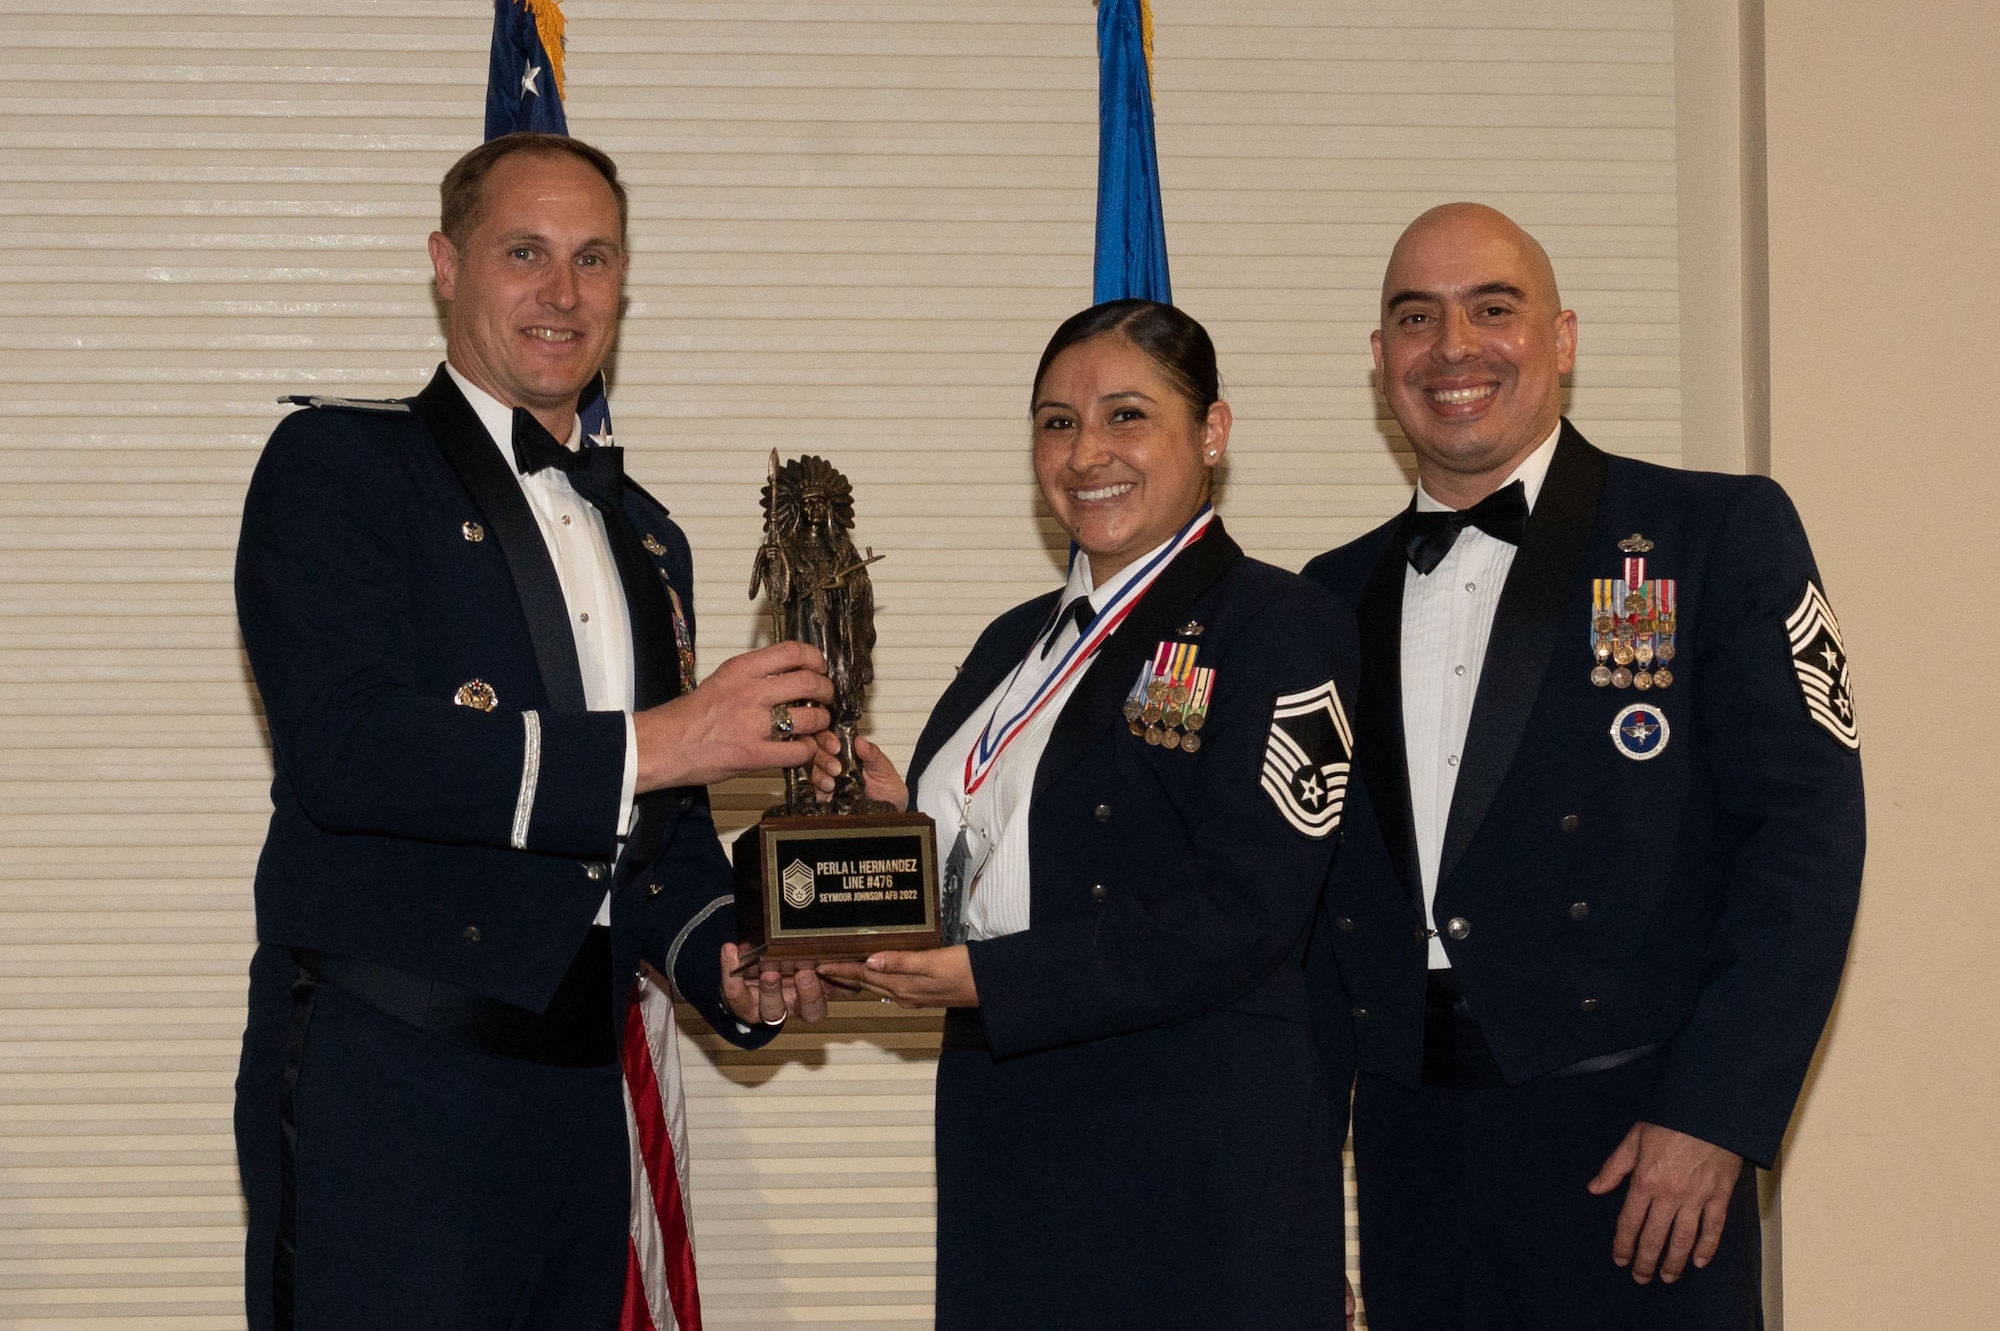 Col. Lucas Teel, 4th Fighter Wing commander, and Chief Master Sgt. Peter Martinez, 4th FW command chief, present a trophy to Senior Master Sgt. Perla Hernandez, 4th Force Support Squadron sustainment services flight chief, during a Chief Master Sergeant Recognition Ceremony at Seymour Johnson Air Force Base, North Carolina, March 24, 2023. Chief master sergeant is the ninth and highest enlisted rank in the U.S. Air Force. (U.S. Air Force photo by Airman 1st Class Rebecca Sirimarco-Lang)